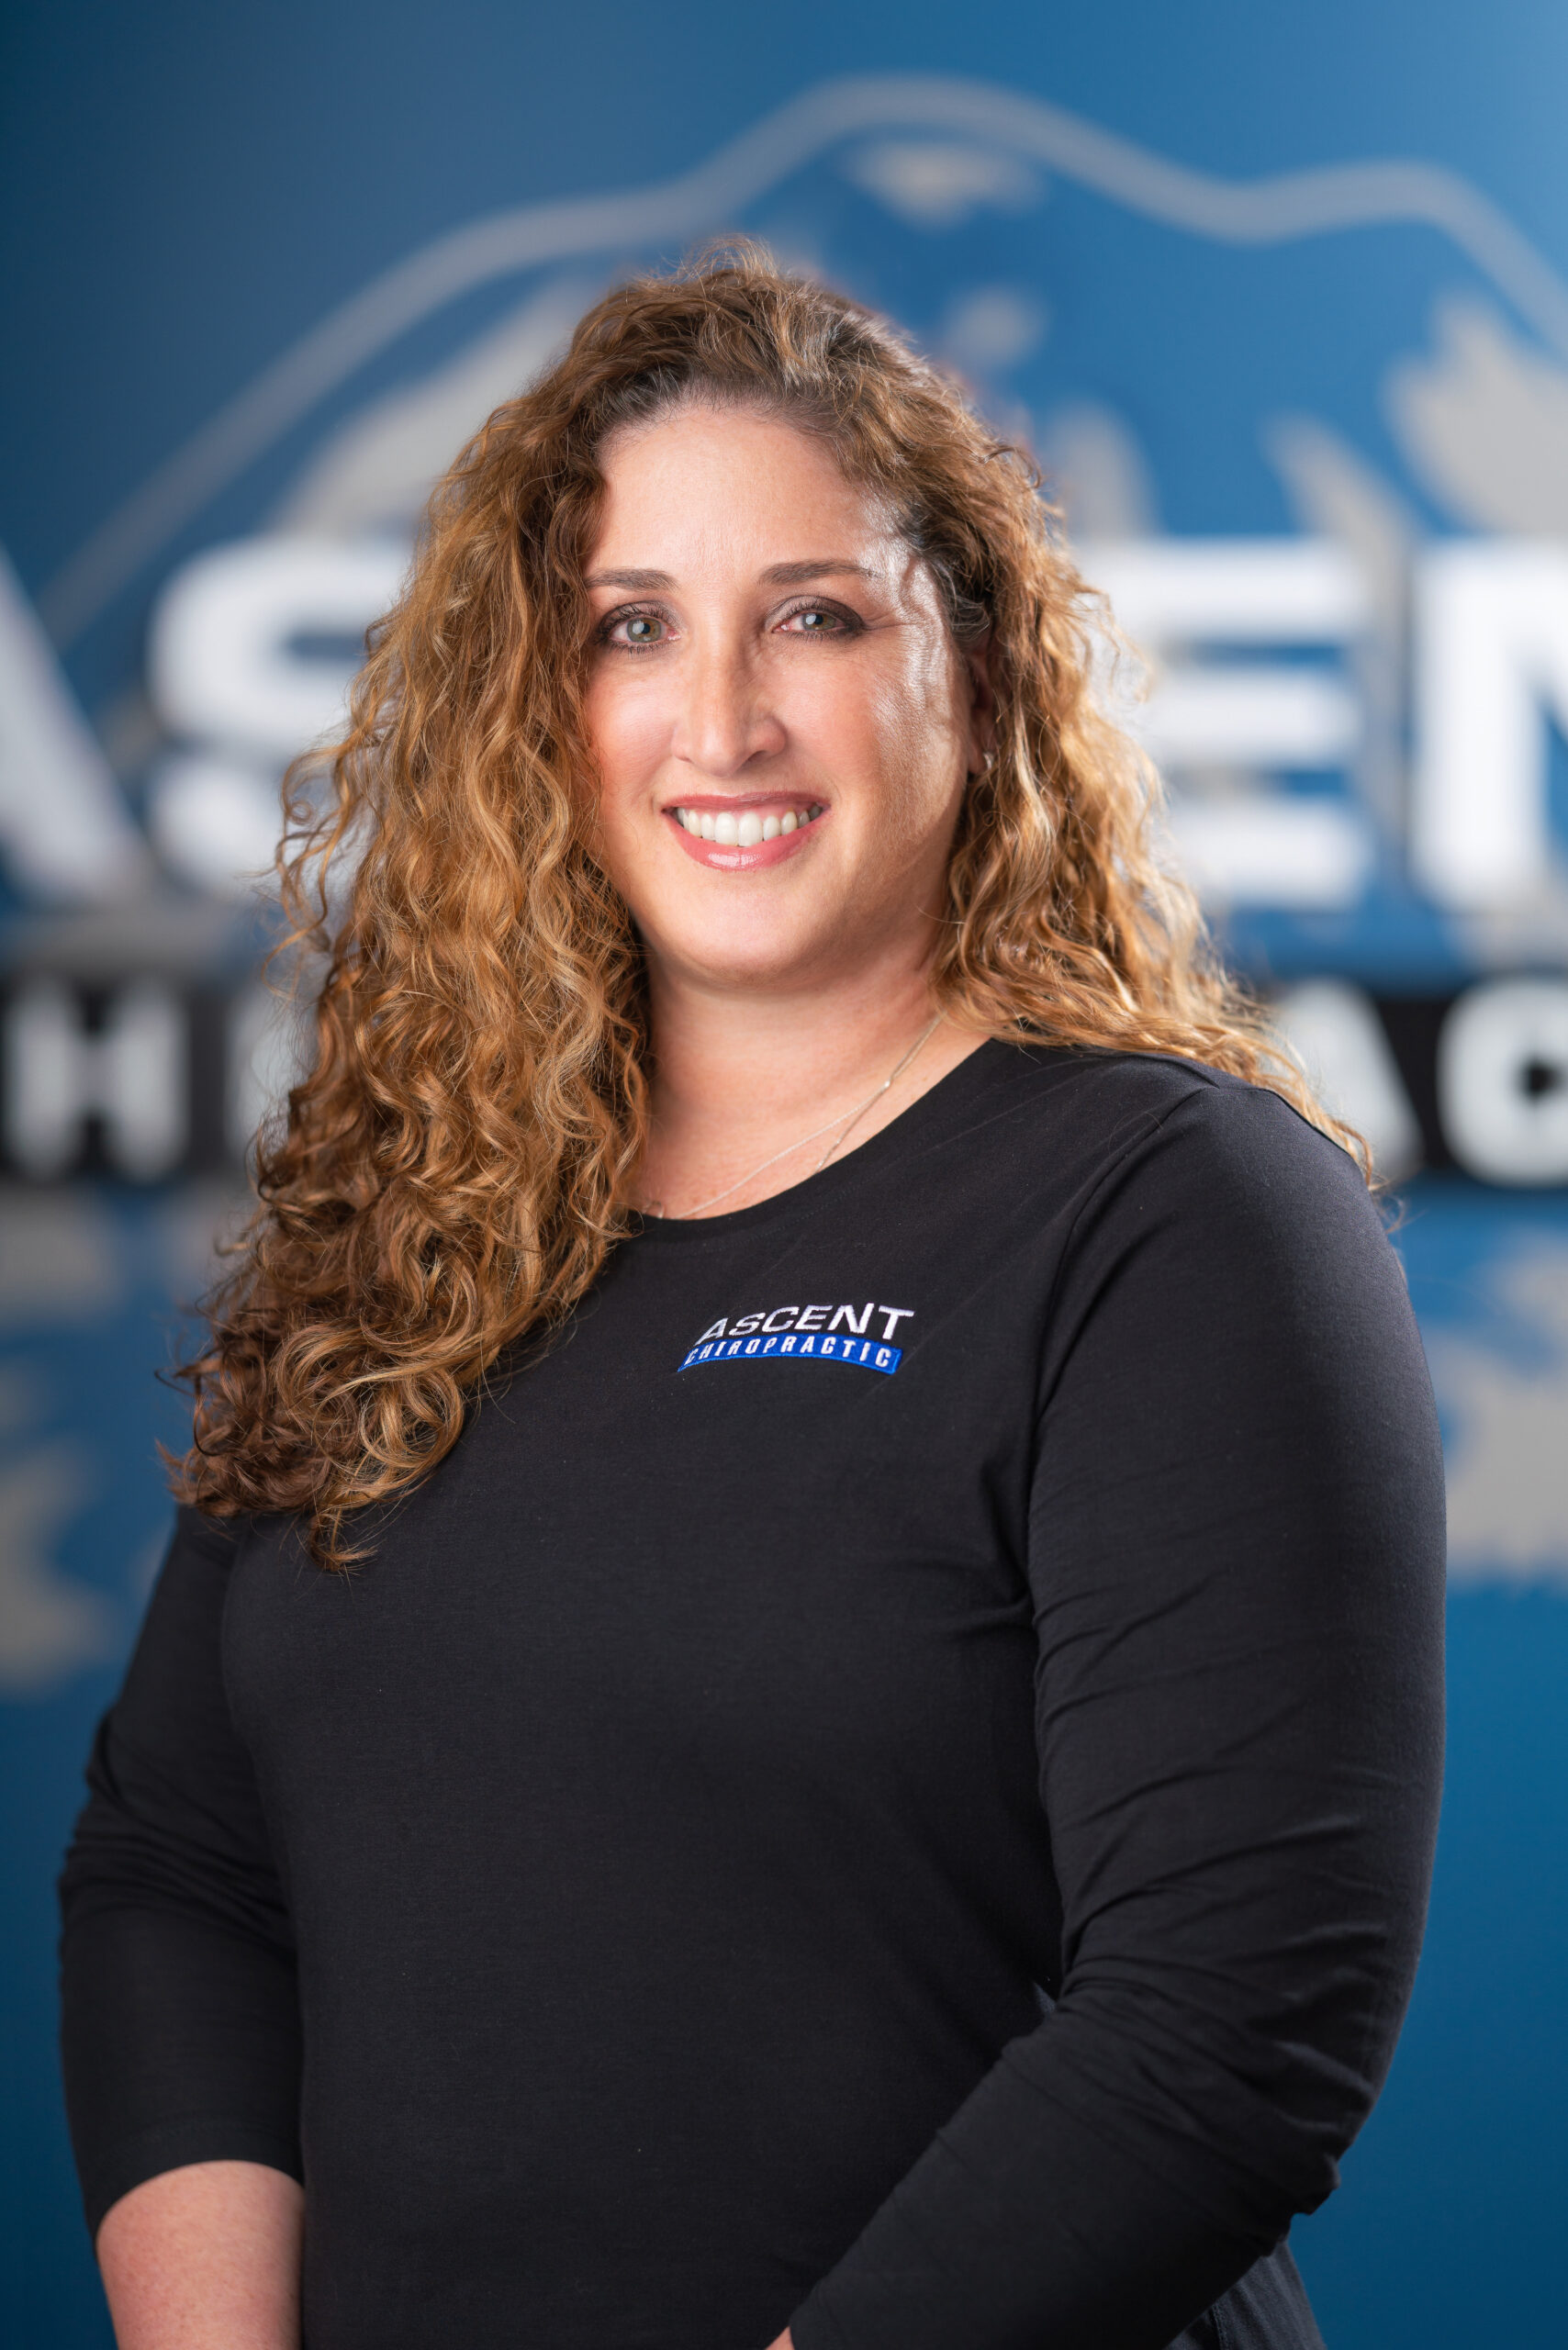 woman with light brown curly hair in an ascent chiropractic logo shirt headshot